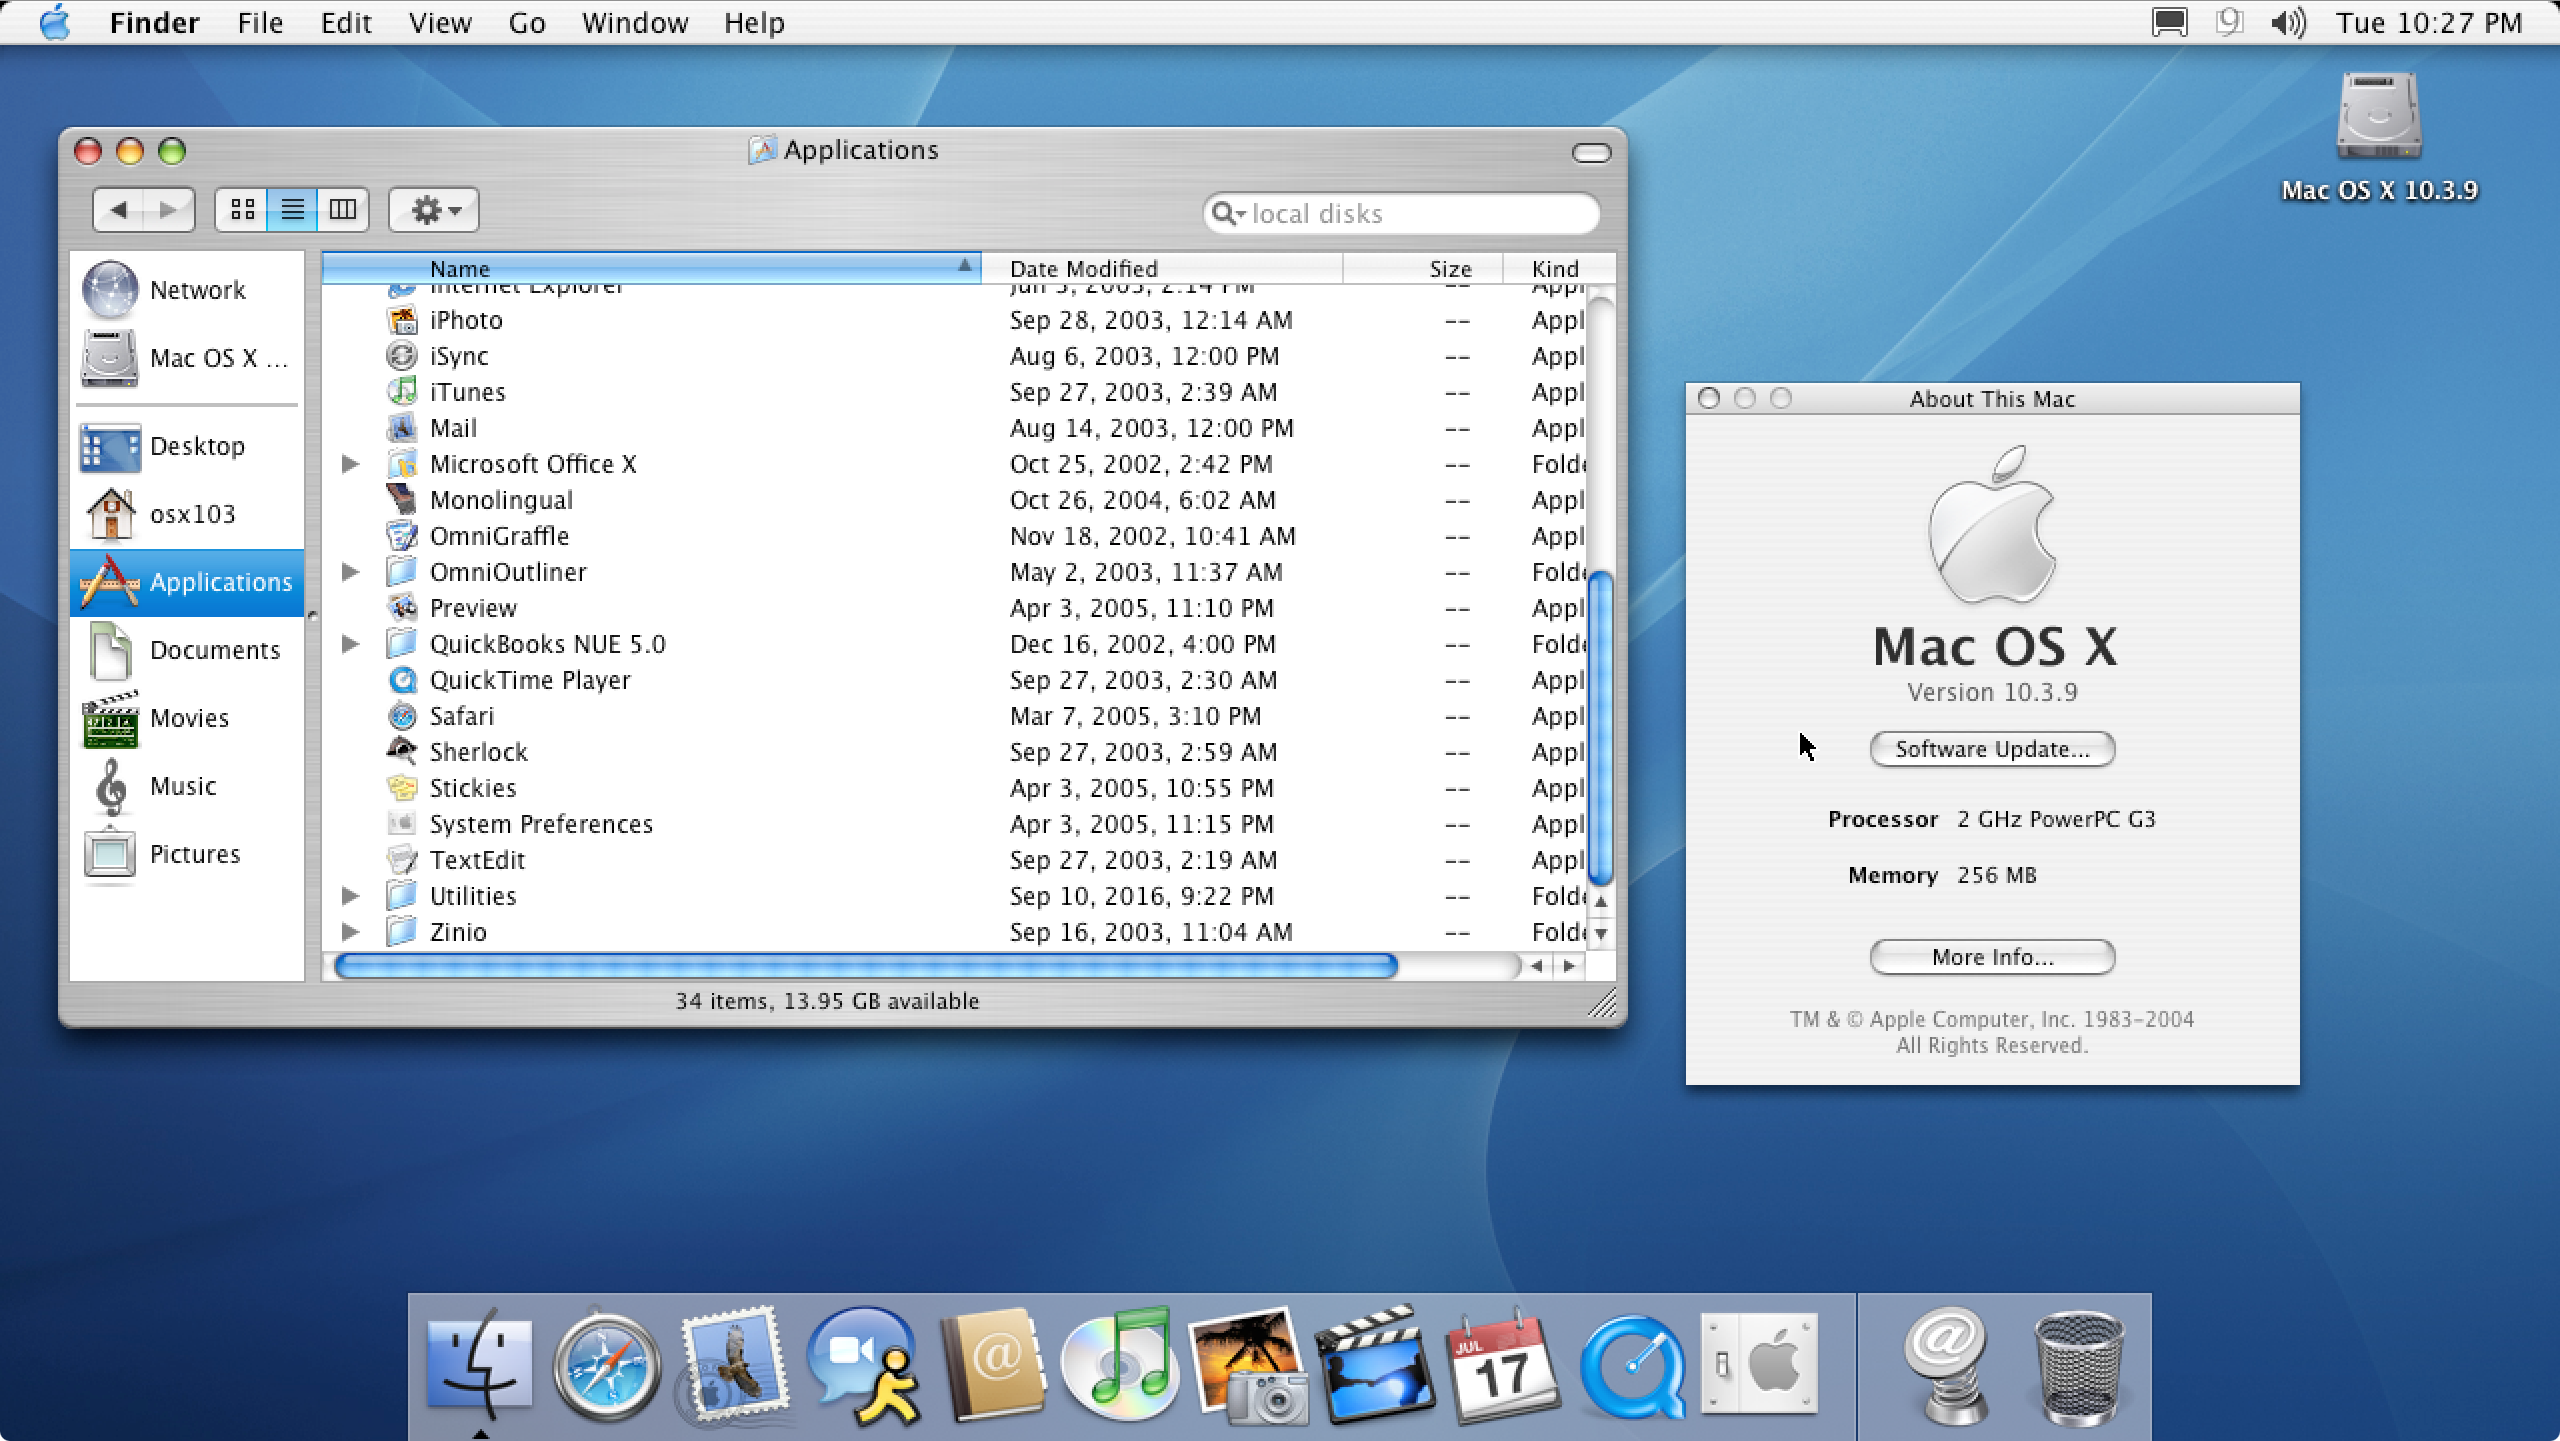 java 6 for mac os x lion 10.7.5